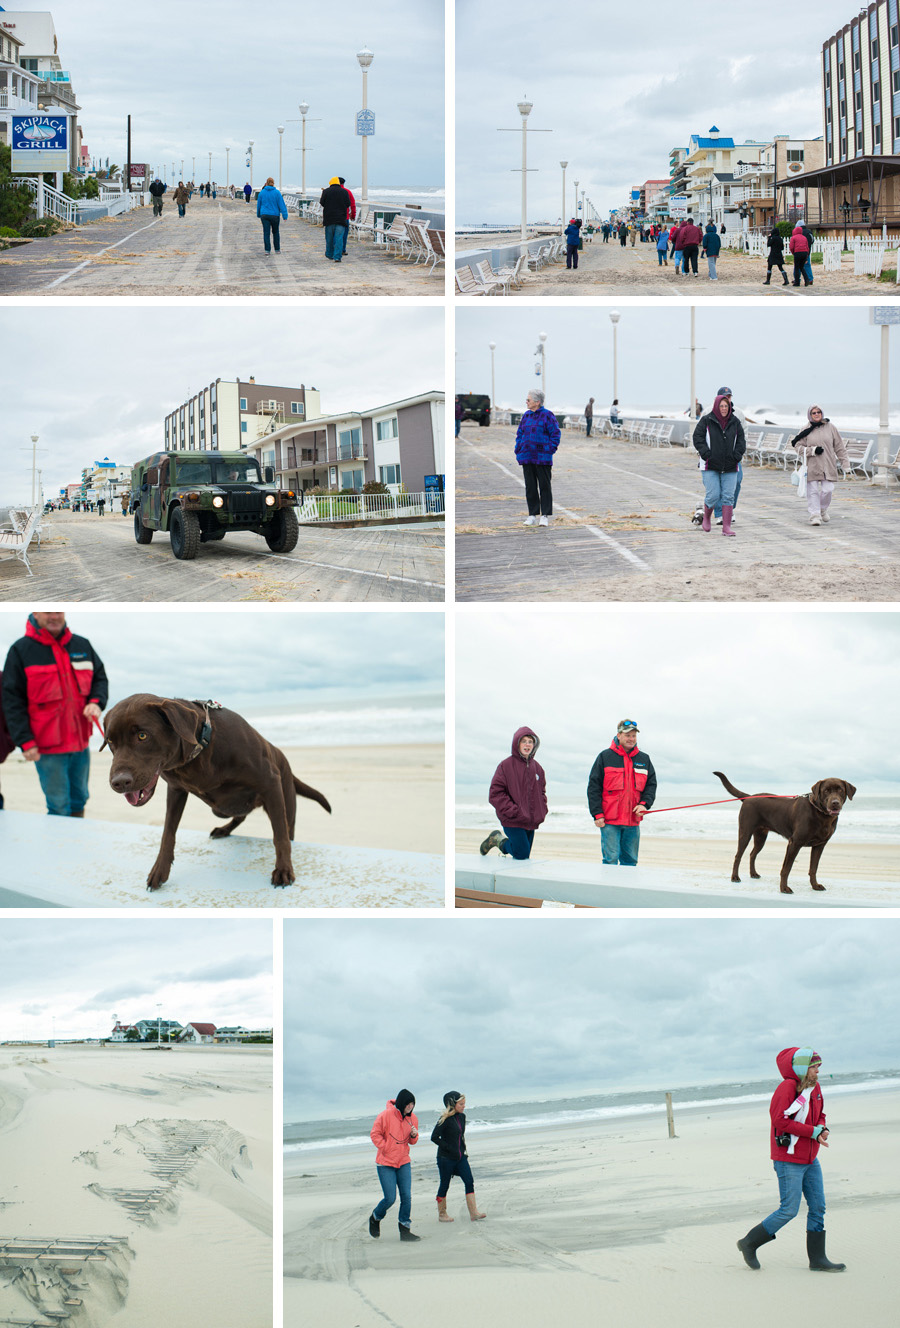 Ocean City Maryland Hurricane Sandy Damages The Morning After